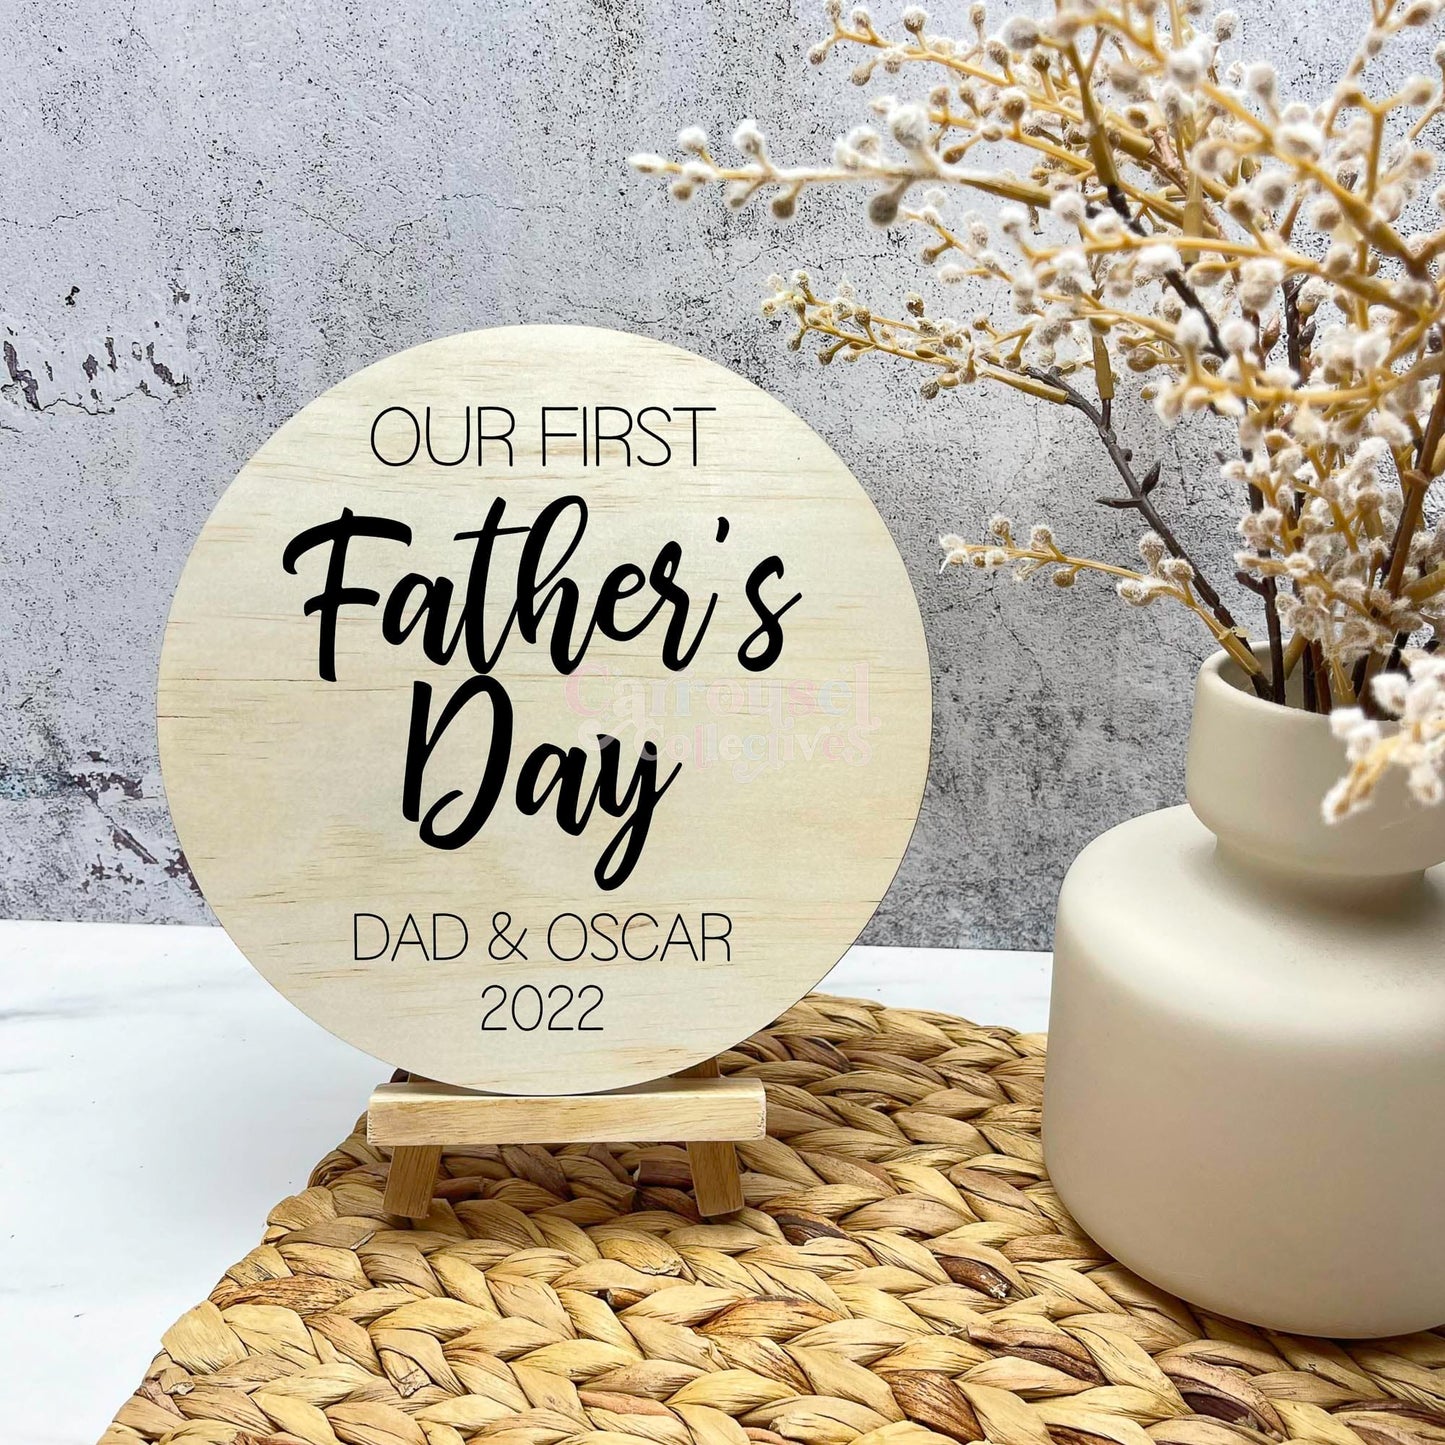 Our first fathers day Sign, Fathers day gifts, printed fathers day signs, Gifts for dad 163